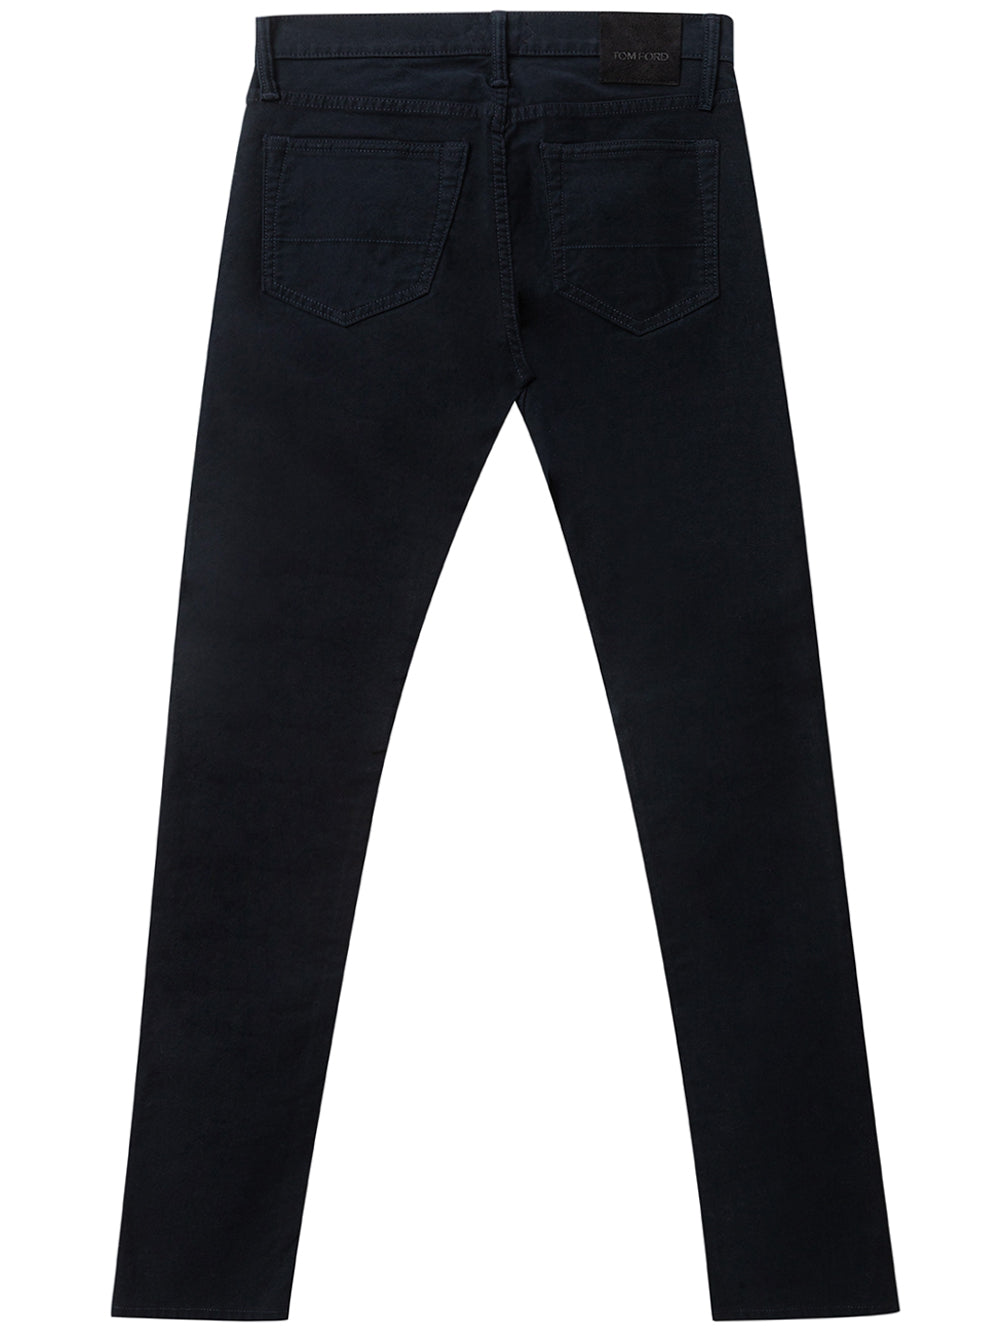 Tom Ford Stretch Five Pocket Trousers